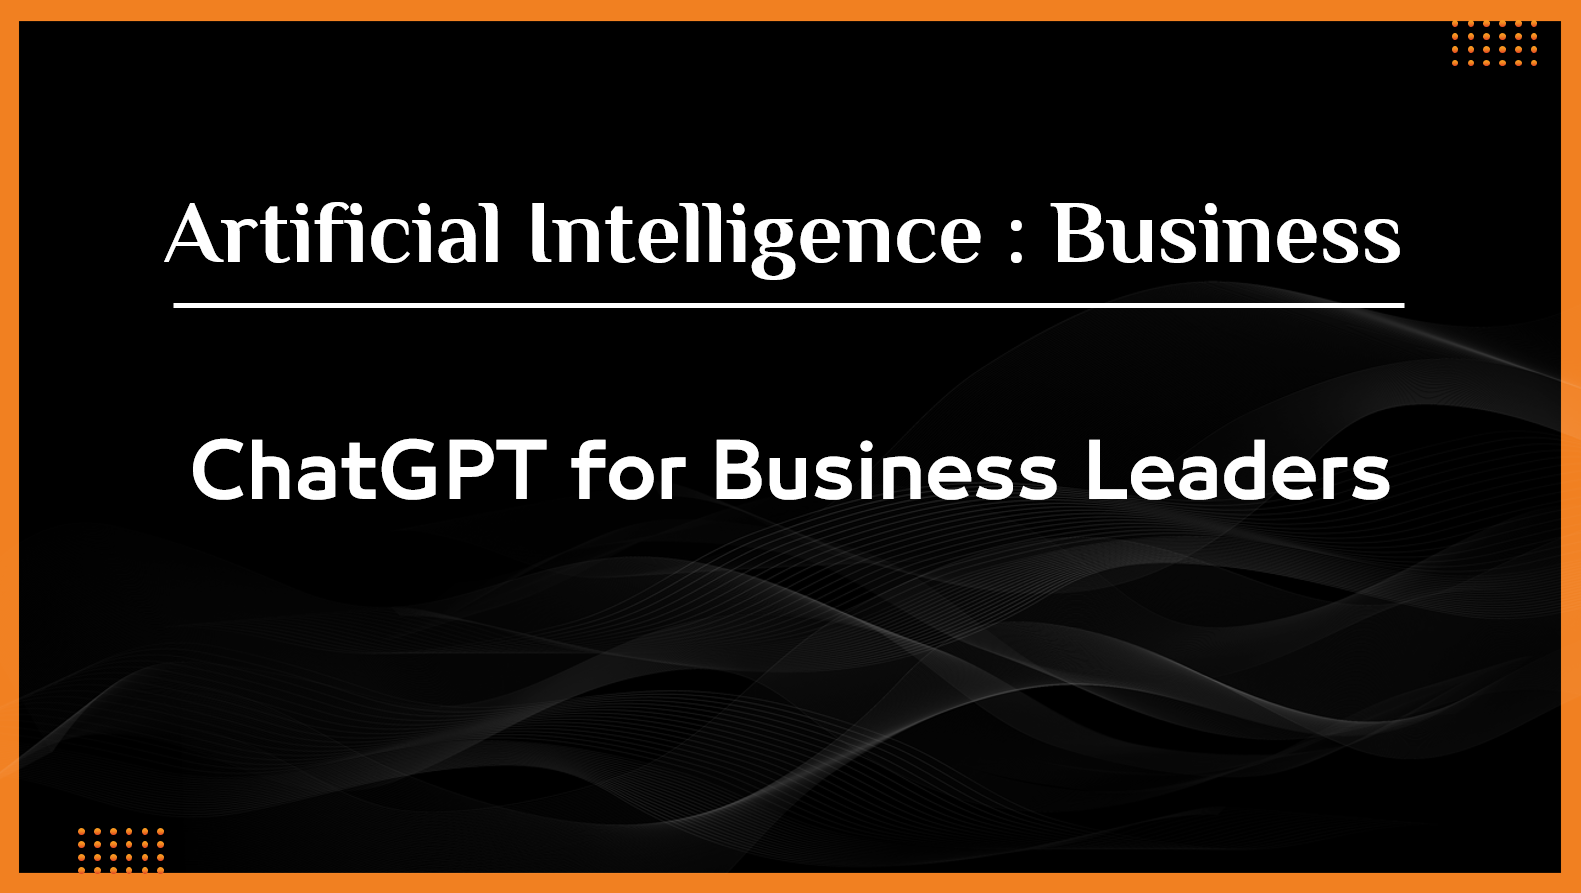 ChatGPT for Business Leaders